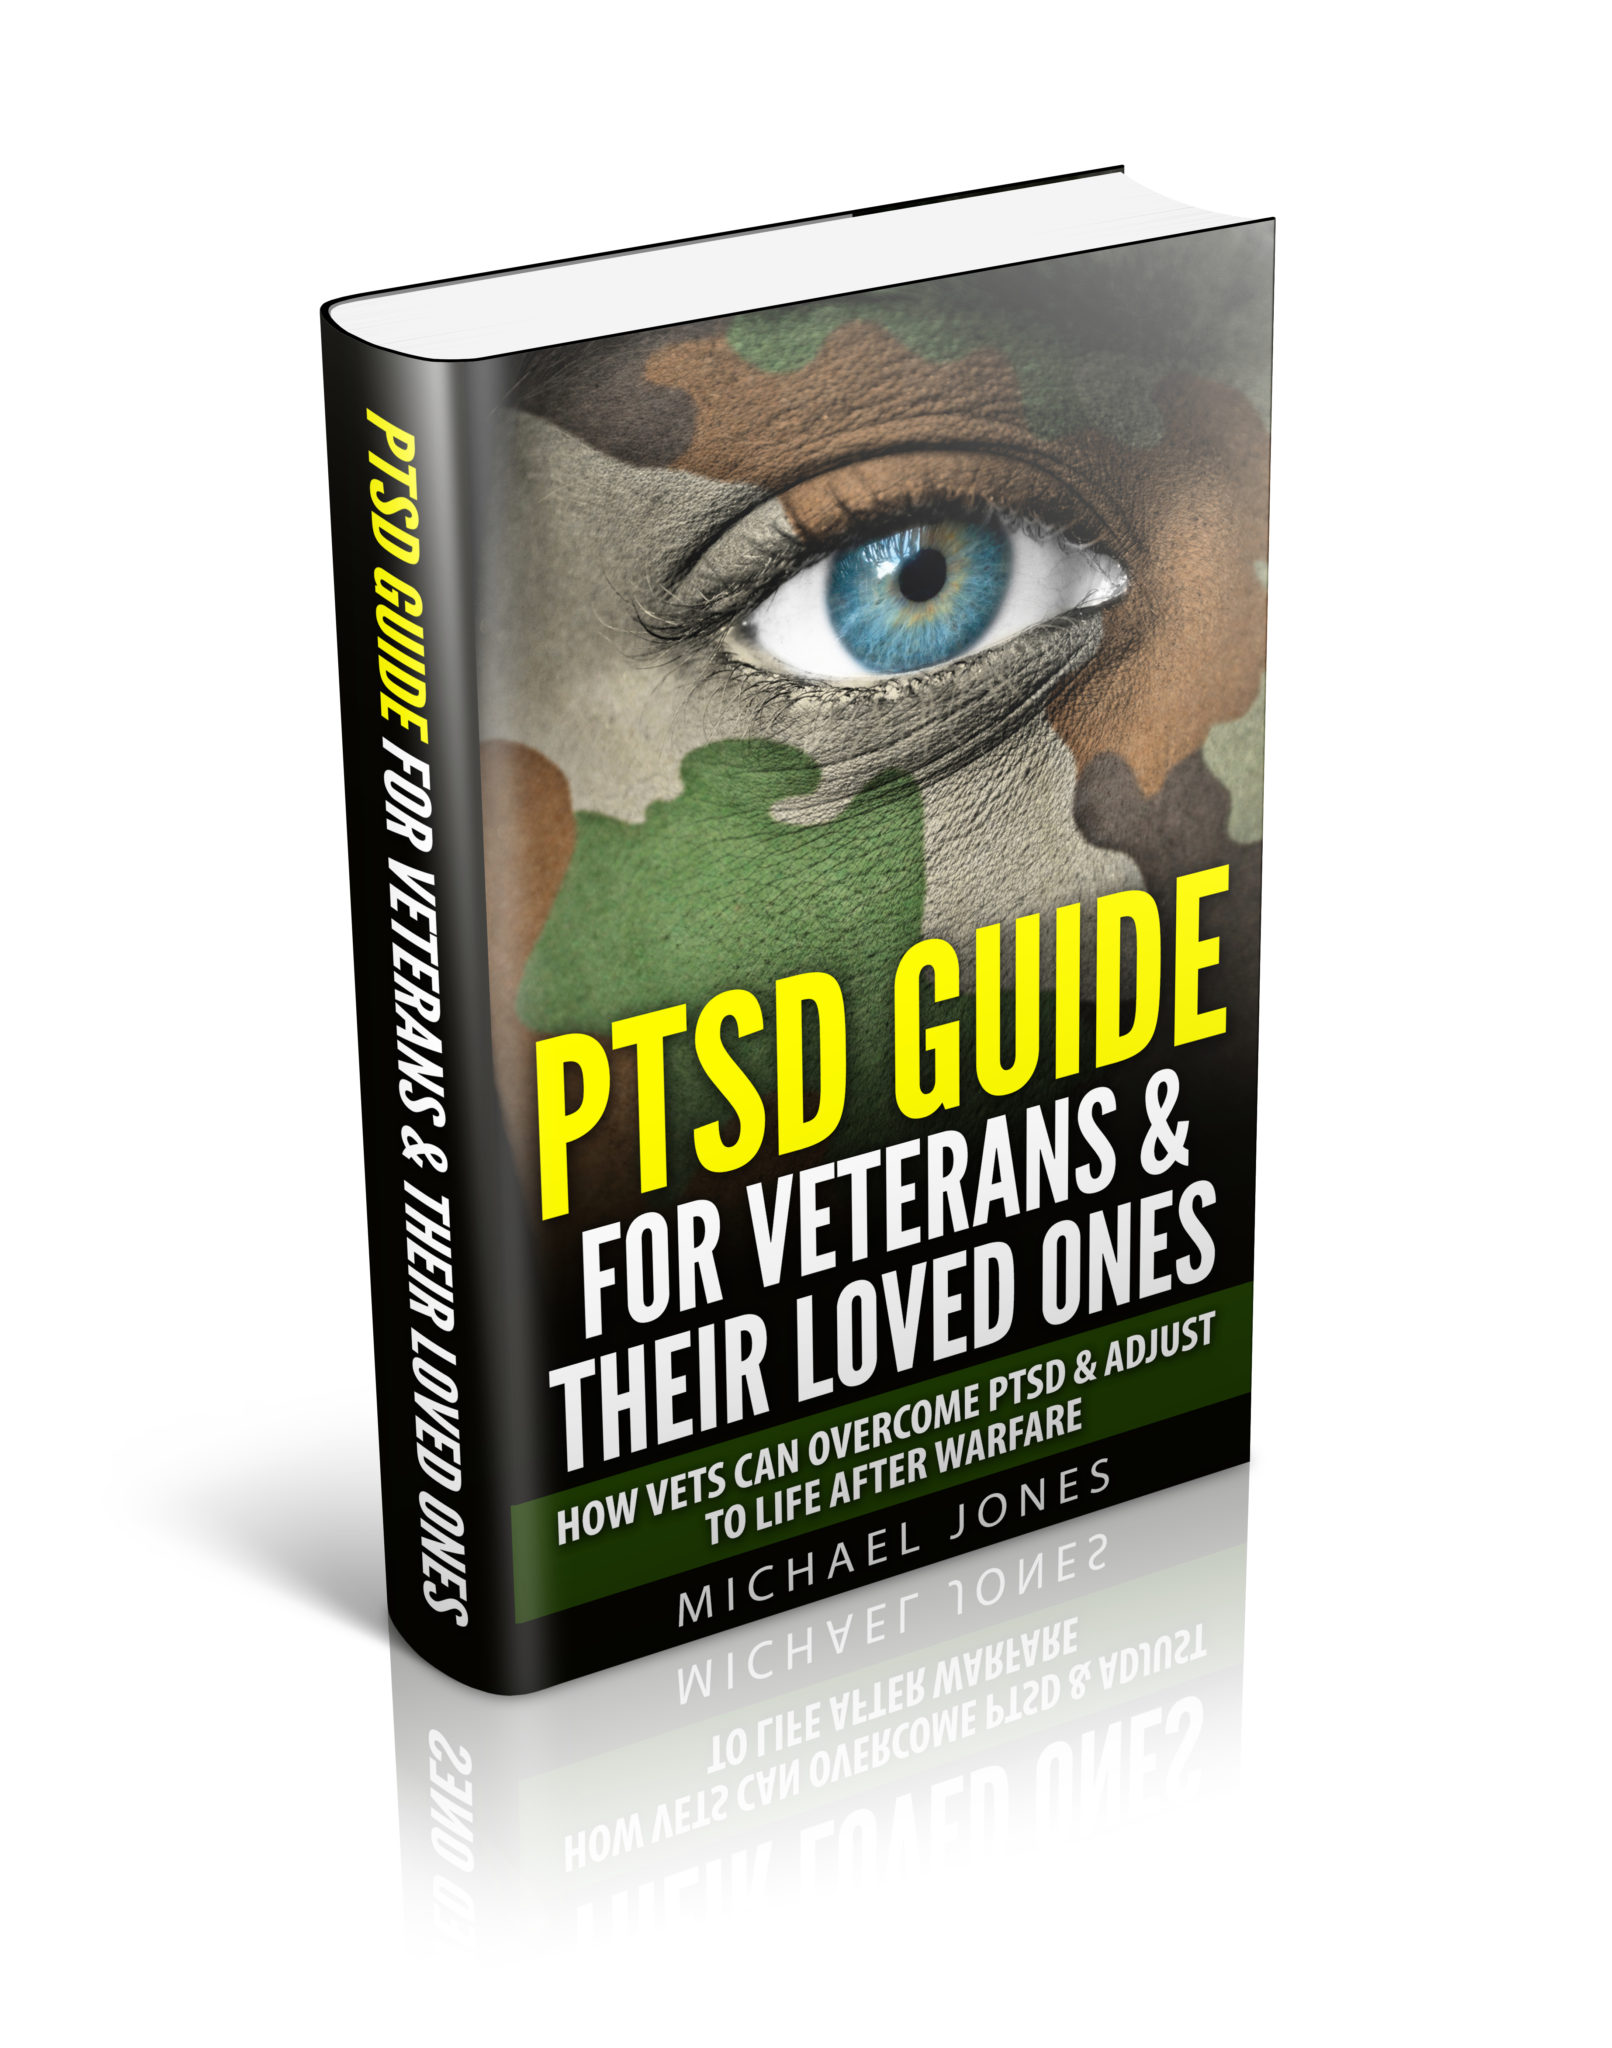 FREE: PTSD Guide For Veterans & Their Loved Ones: How Vets Can Overcome Post Traumatic Stress Disorder & Adjust To Like After Warfare by Michael Jones